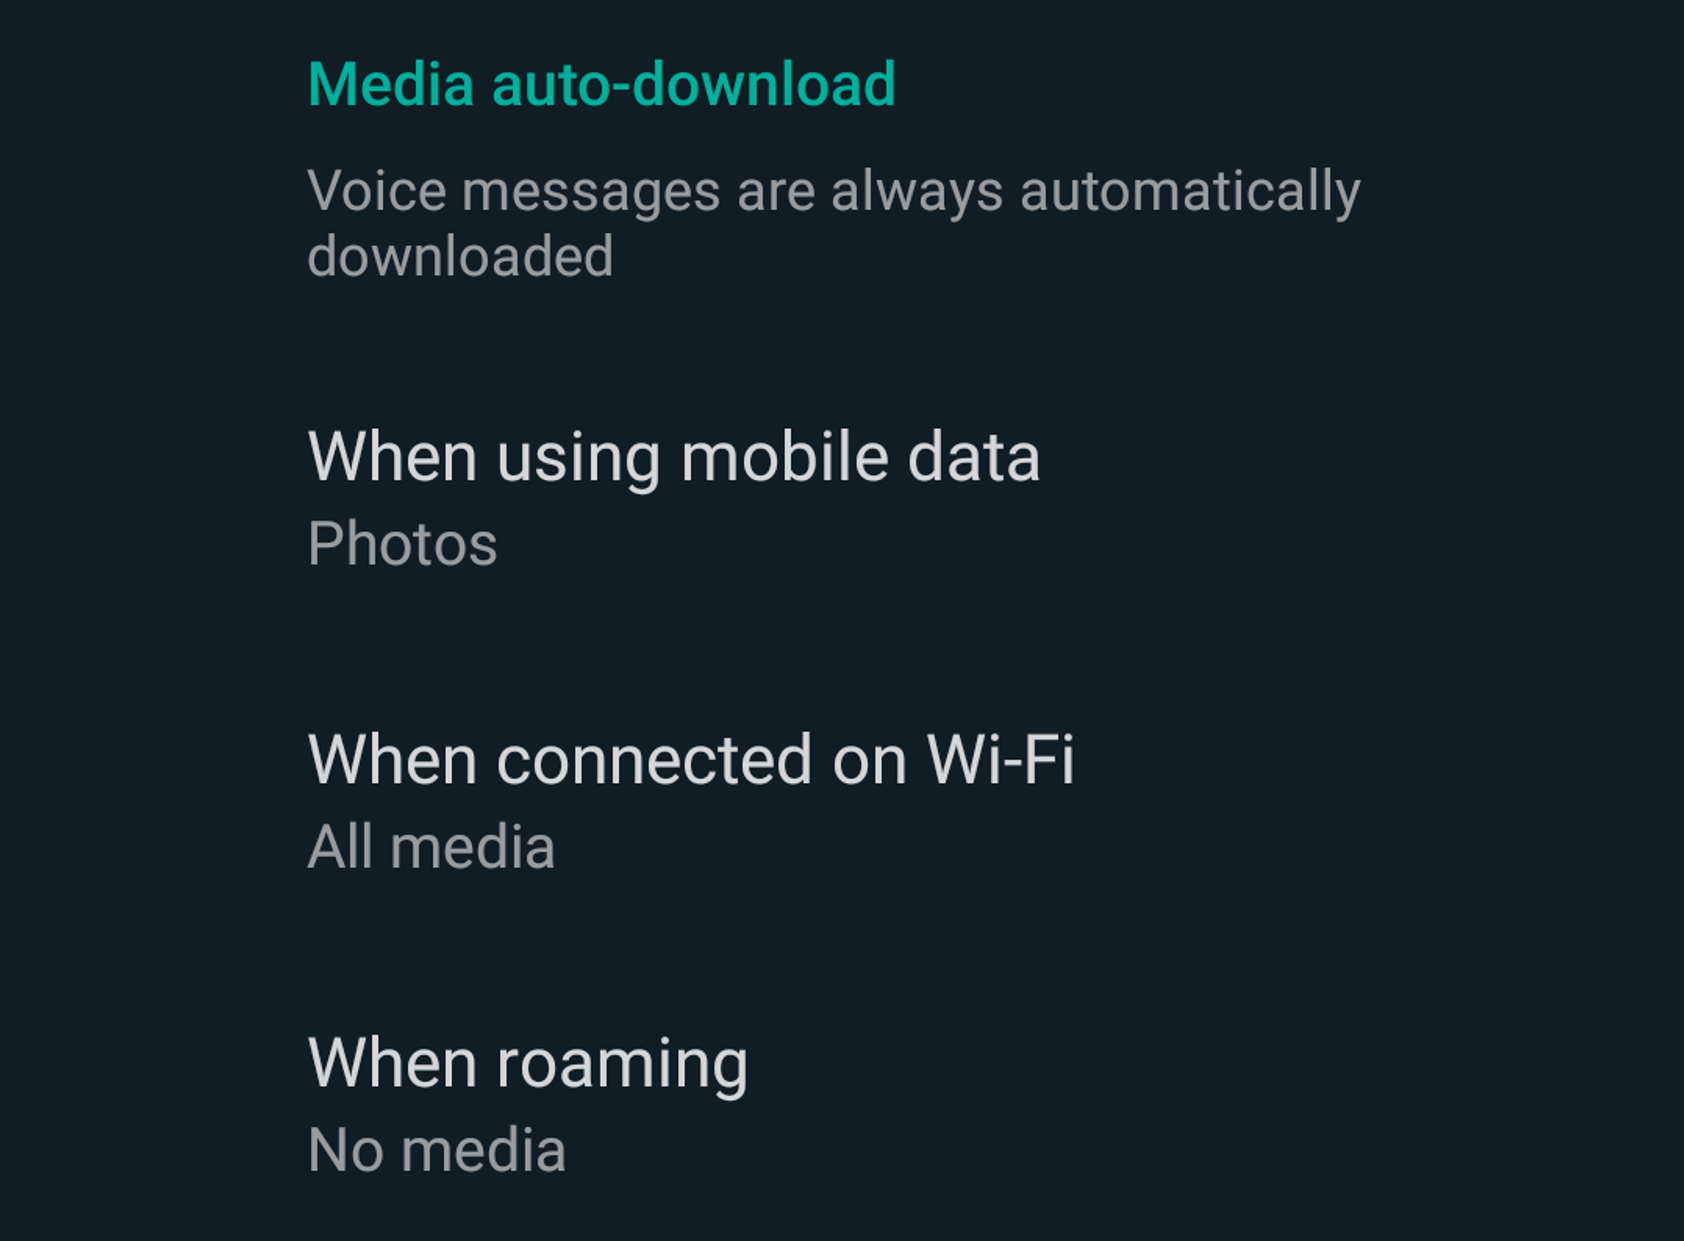 Changing WhatsApp's media auto-download settings